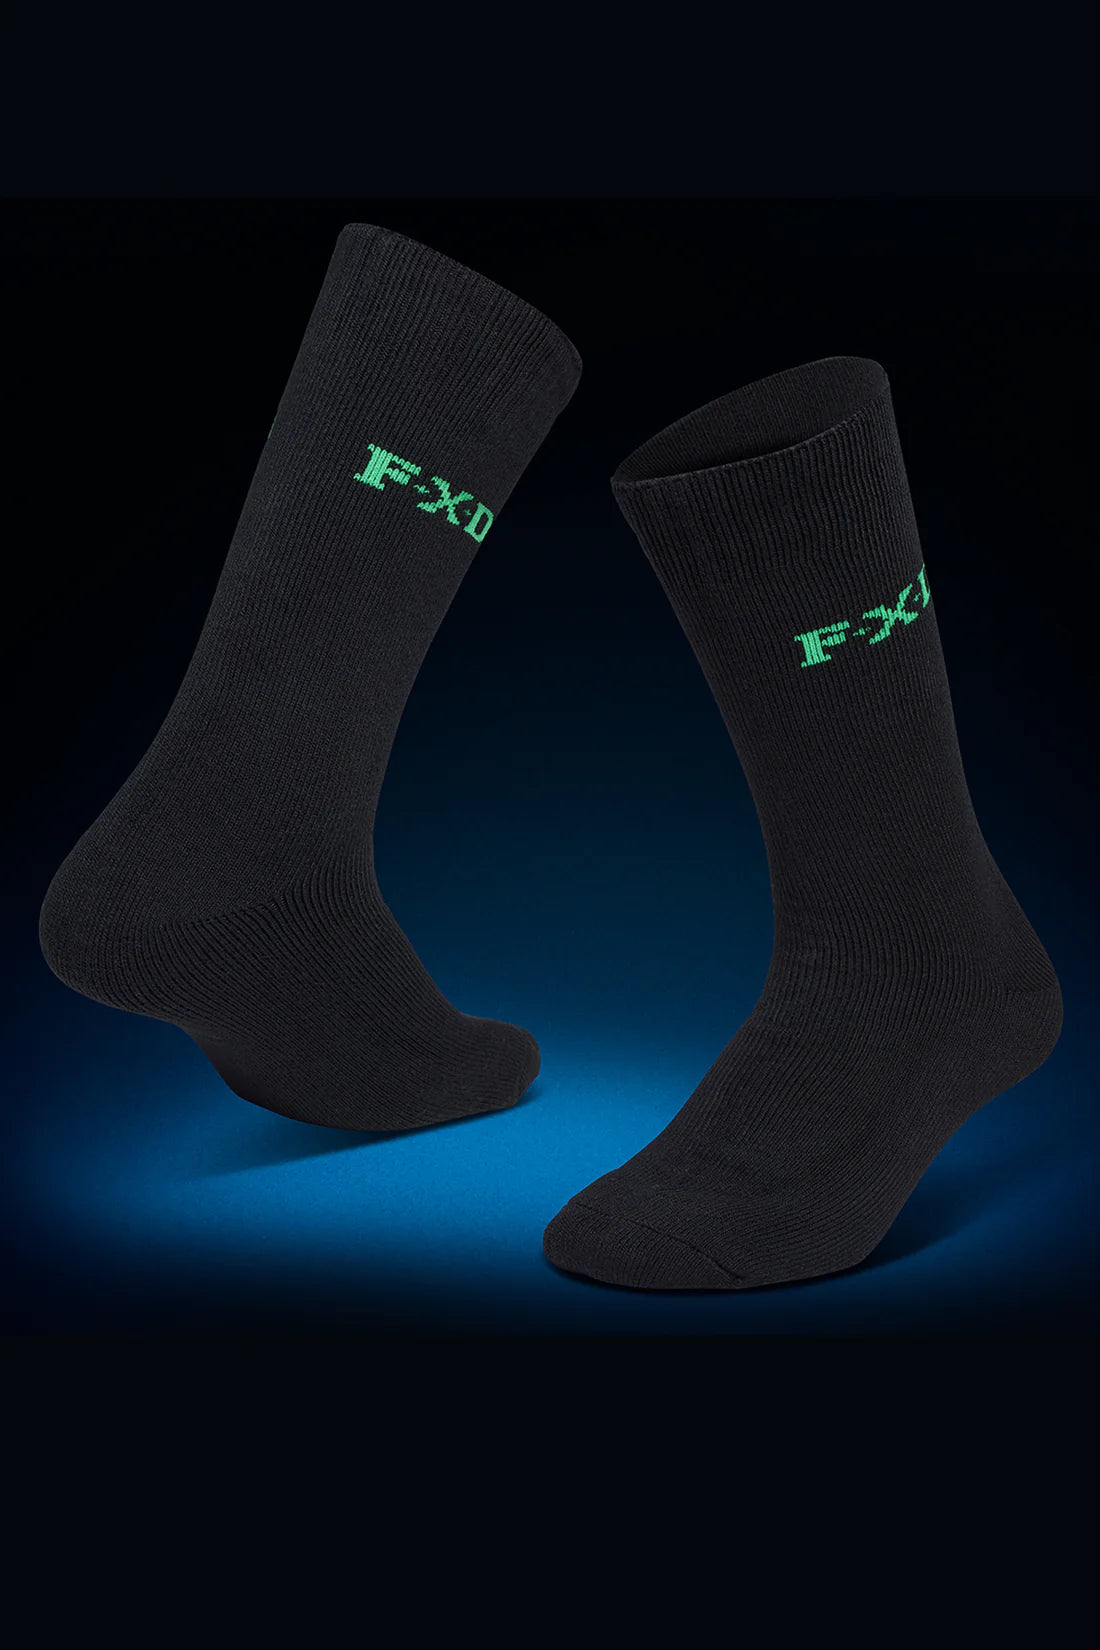 4pk Socks - made by FXD Workwear